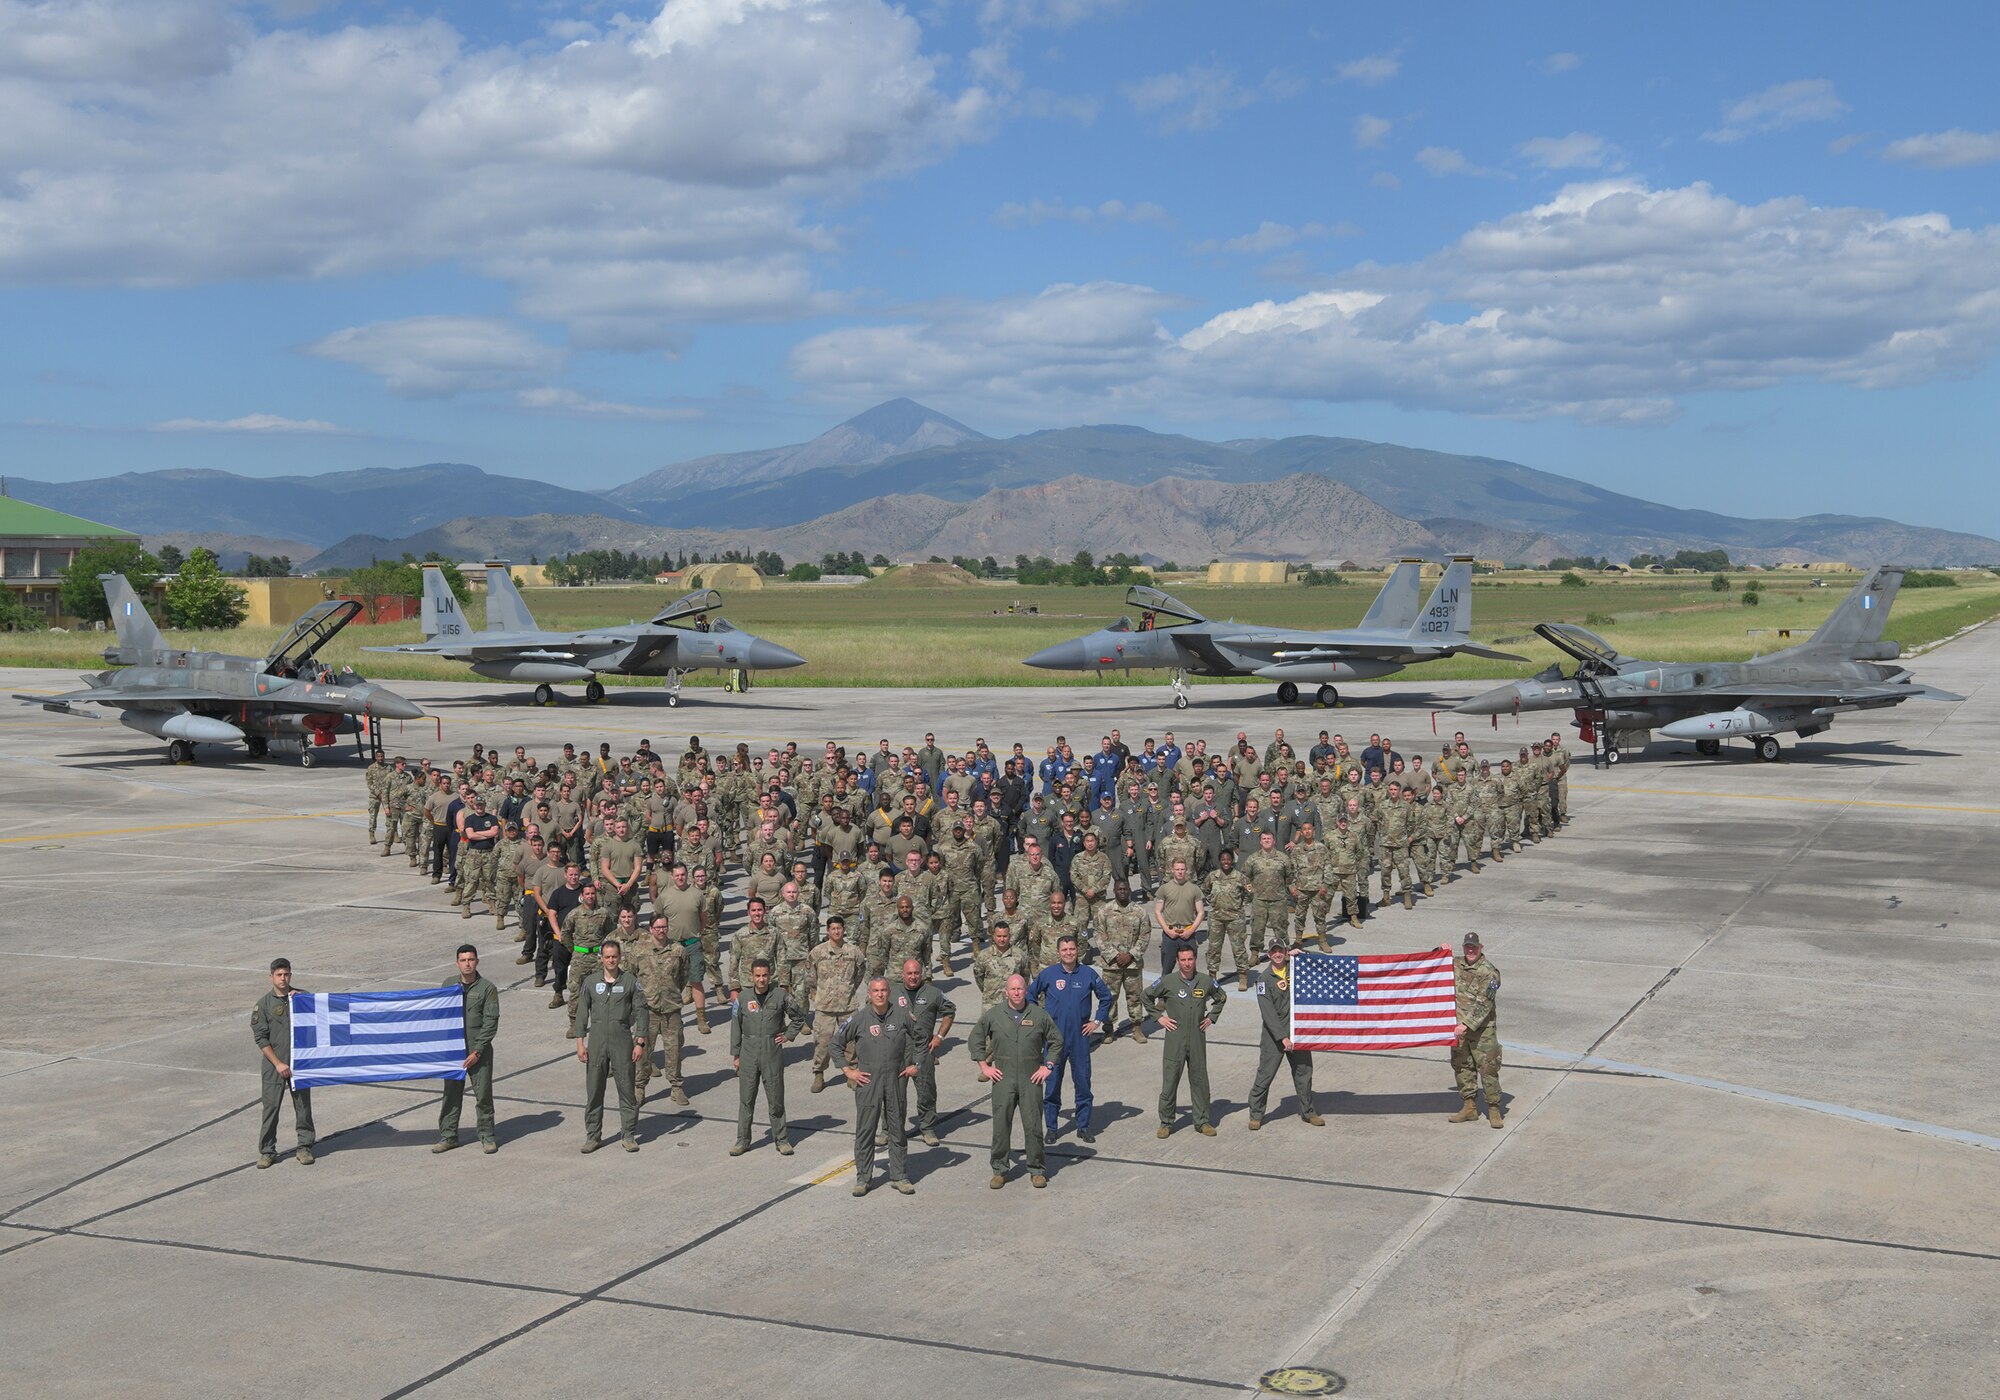 U.S. Air Force and Hellenic Air Force personnel join together at the conclusion of exercise Astral Knight, May 21, 2021. The 48th Fighter Wing trained with military forces from Albania, Croatia, Greece, Italy, and Slovenia as well as U.S. units from around European Command enhancing the readiness, strength and cohesion of these alliances. (U.S. Air Force photo by Tech. Sgt. Alex Fox Echols III)